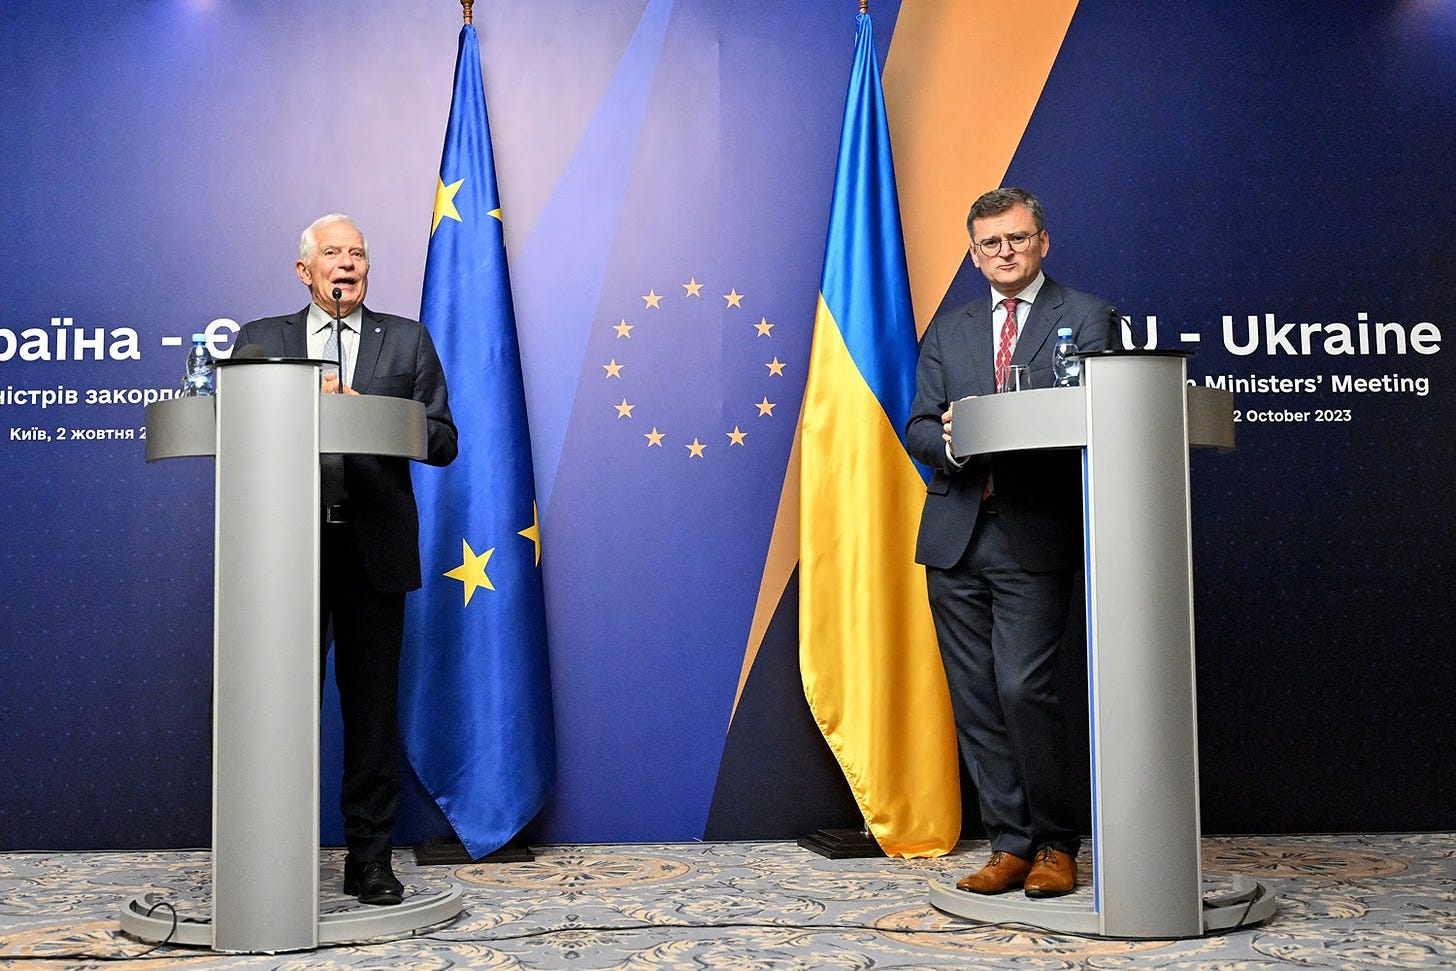 European Union chief Josep Borrell and Ukrainian Foreign Minister Dmytro Kuleba attend a press conference.